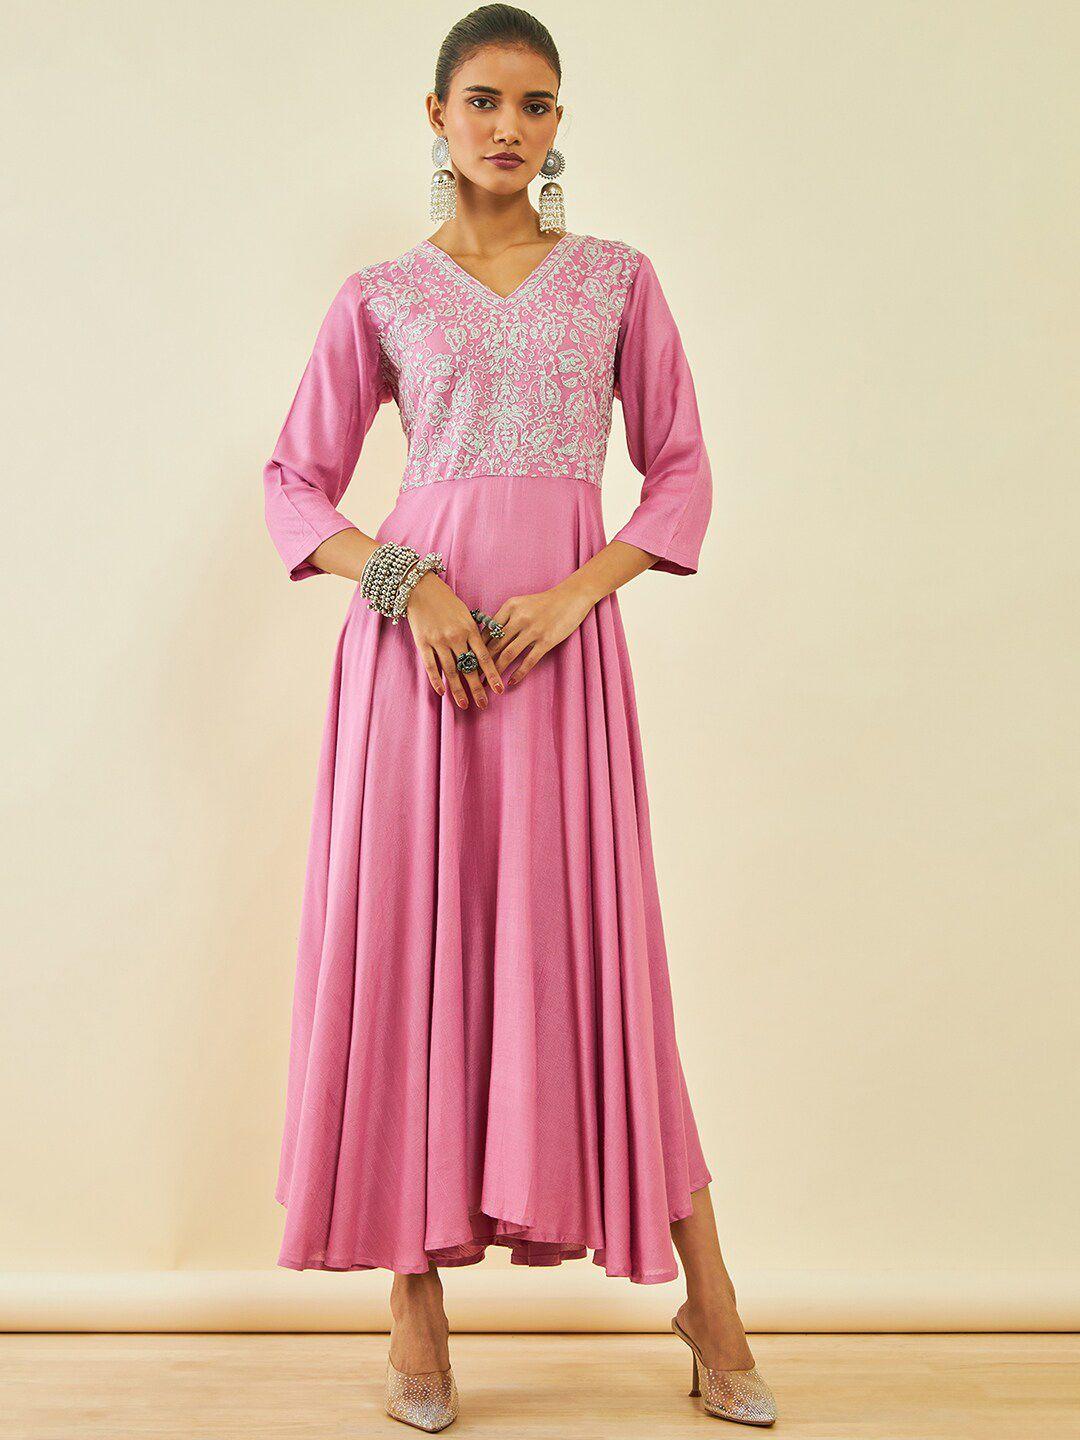 soch-floral-embroidered-ethnic-dress